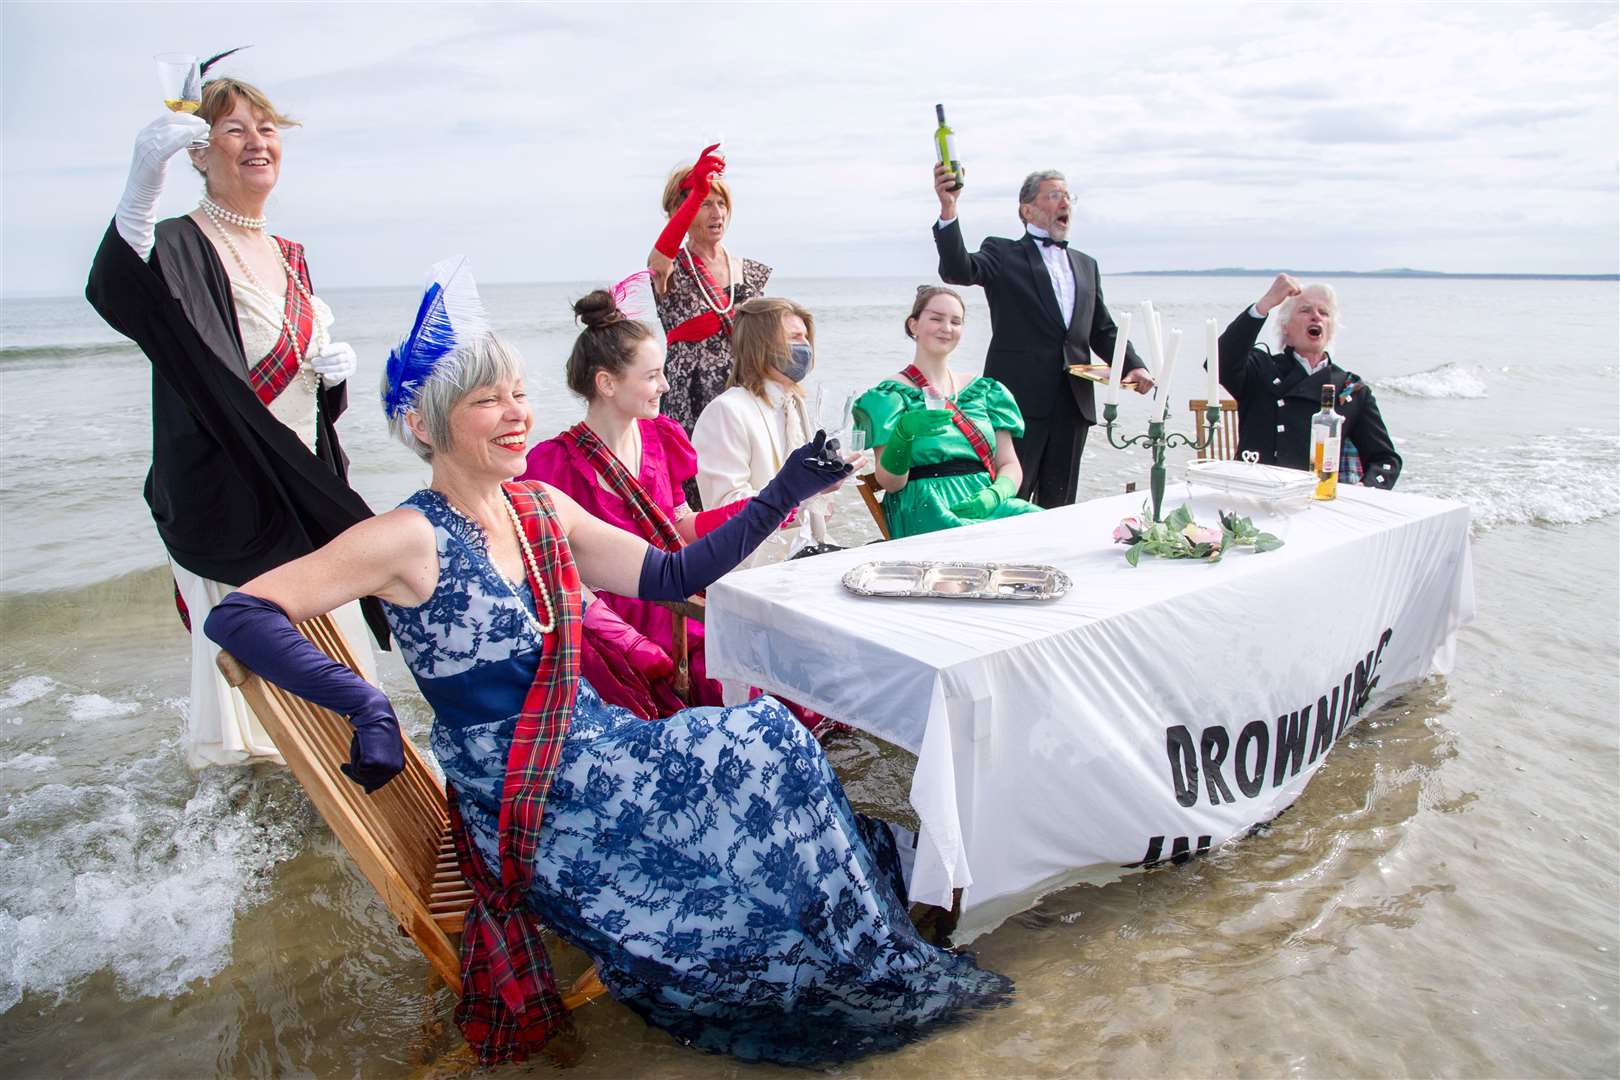 The Extinction Rebellion Forres group hold a dinner party demonstration in the waters at Findhorn ahead of the G7 Summit in Cornwall...Picture: Daniel Forsyth..